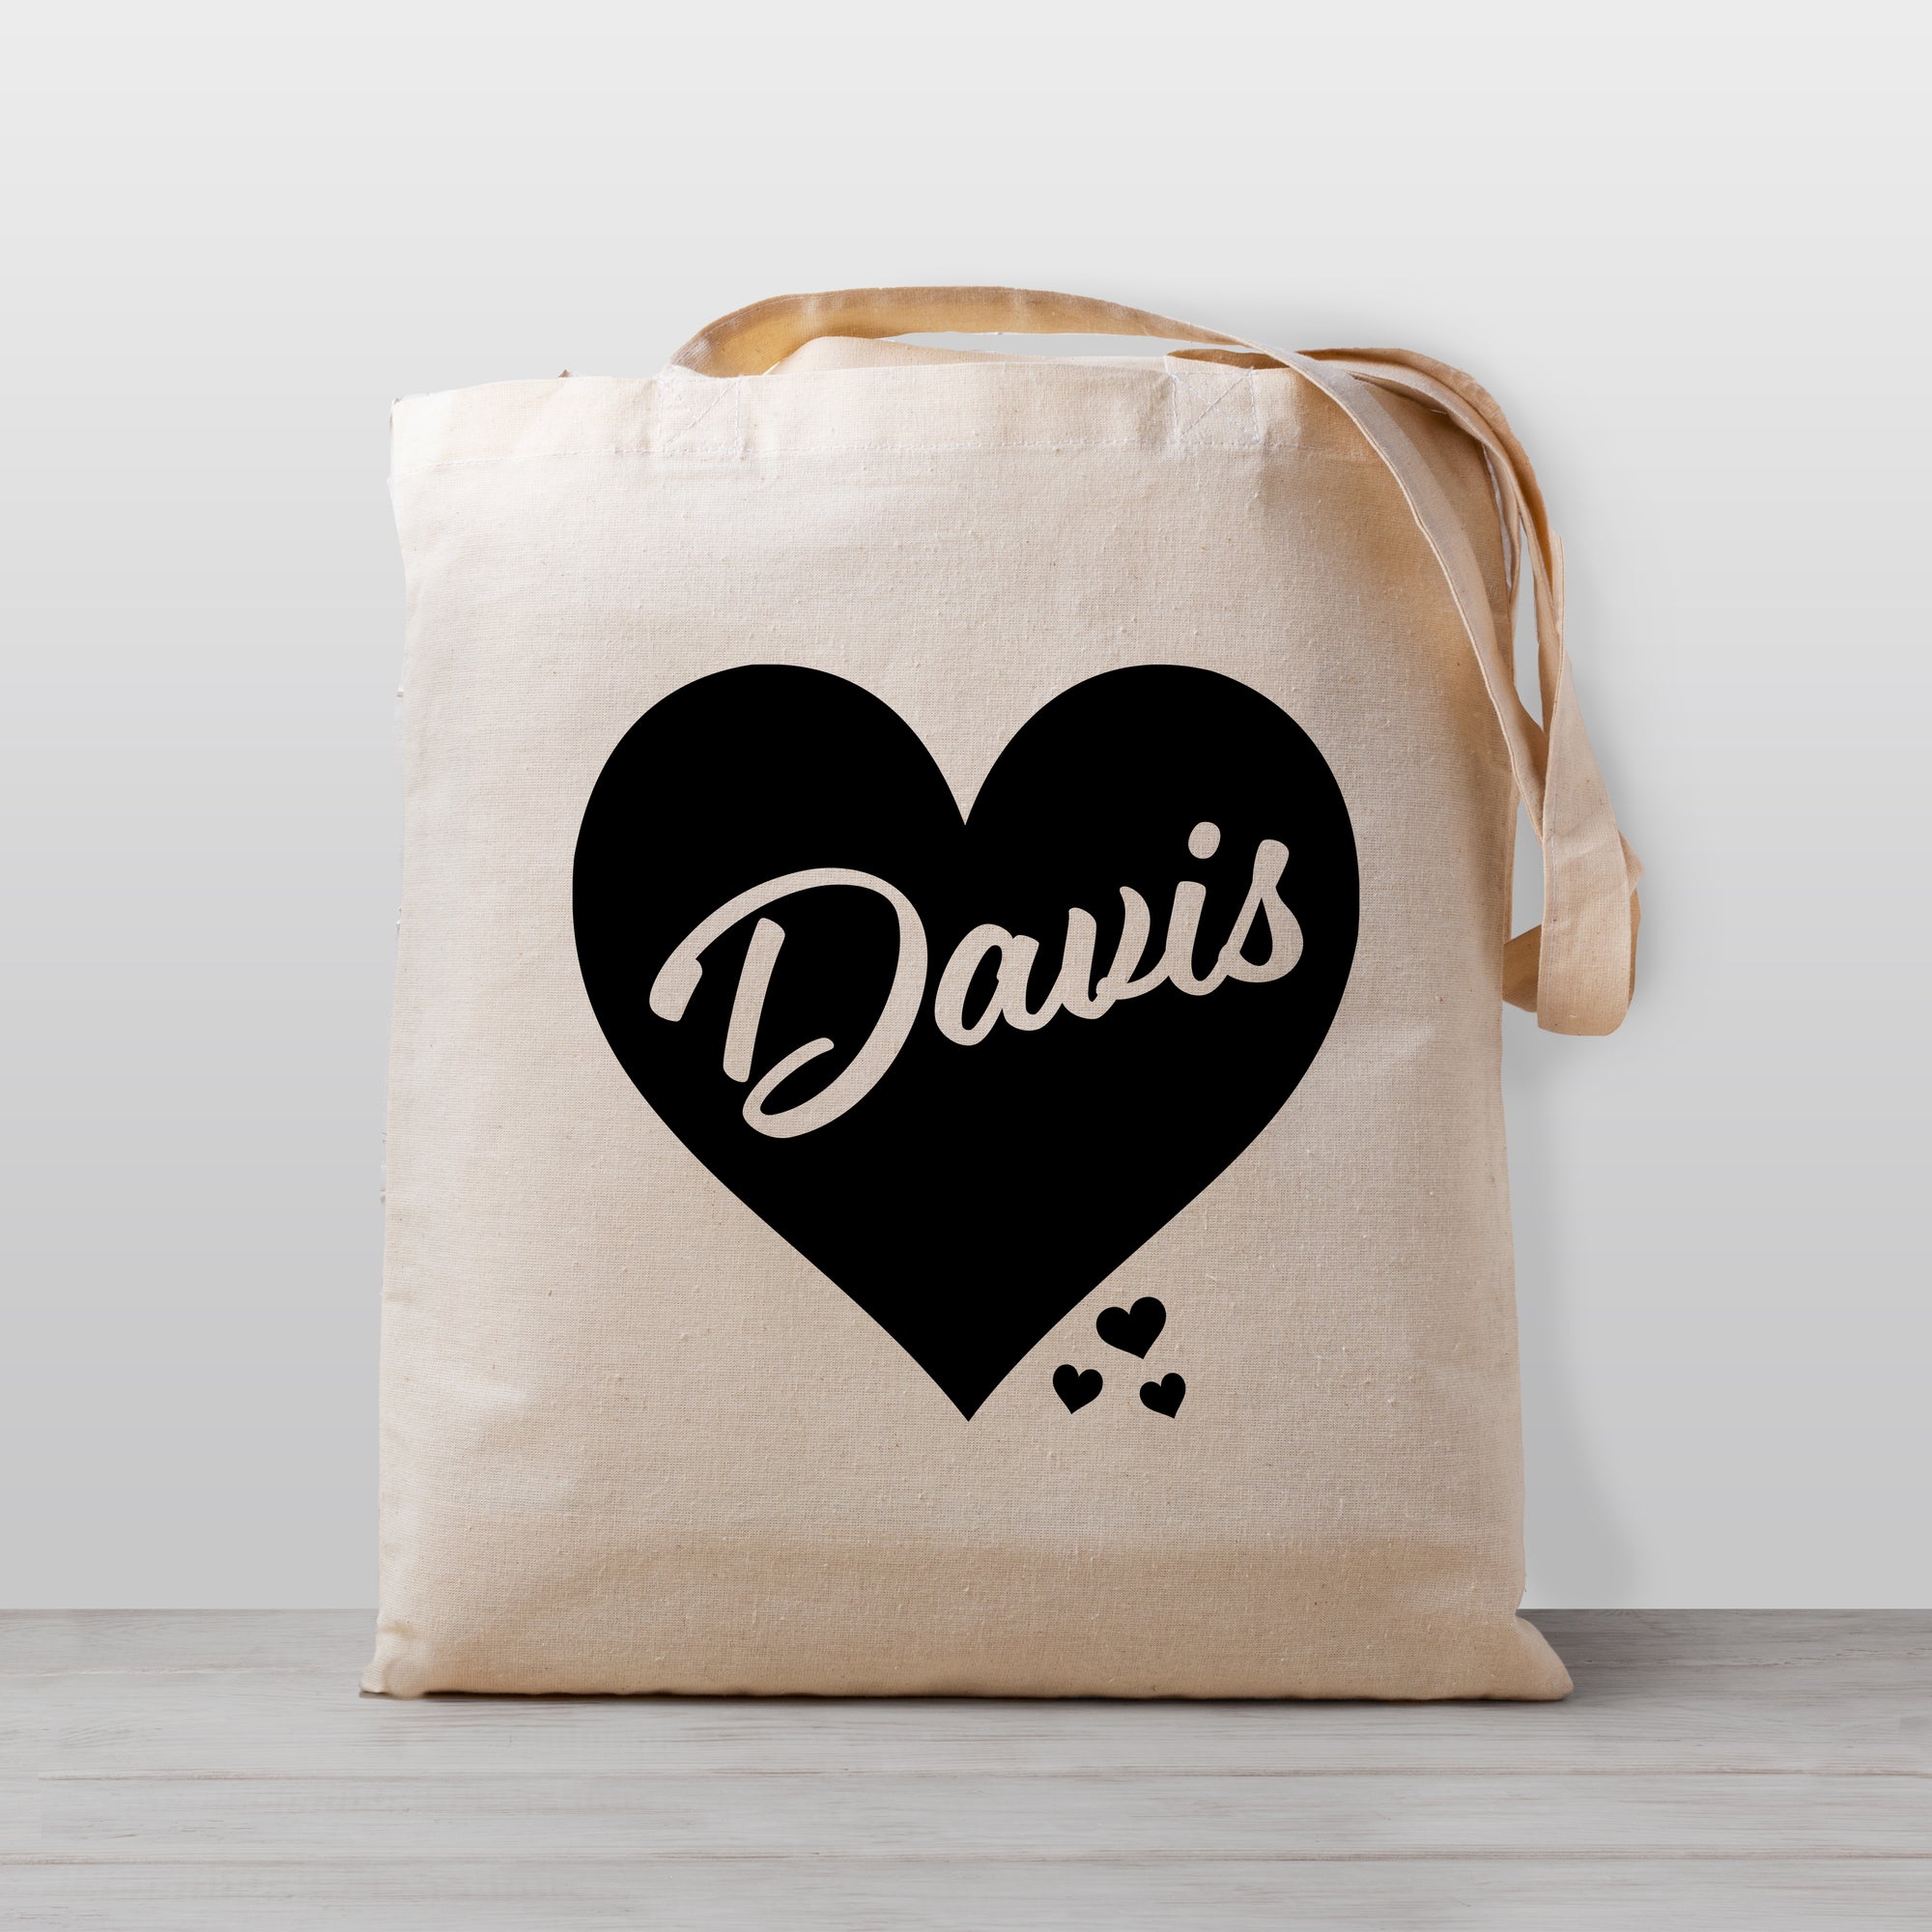 Personalized Kids' Tote Bag with a large heart, graphic can be printed in any color, 100% natural cotton canvas